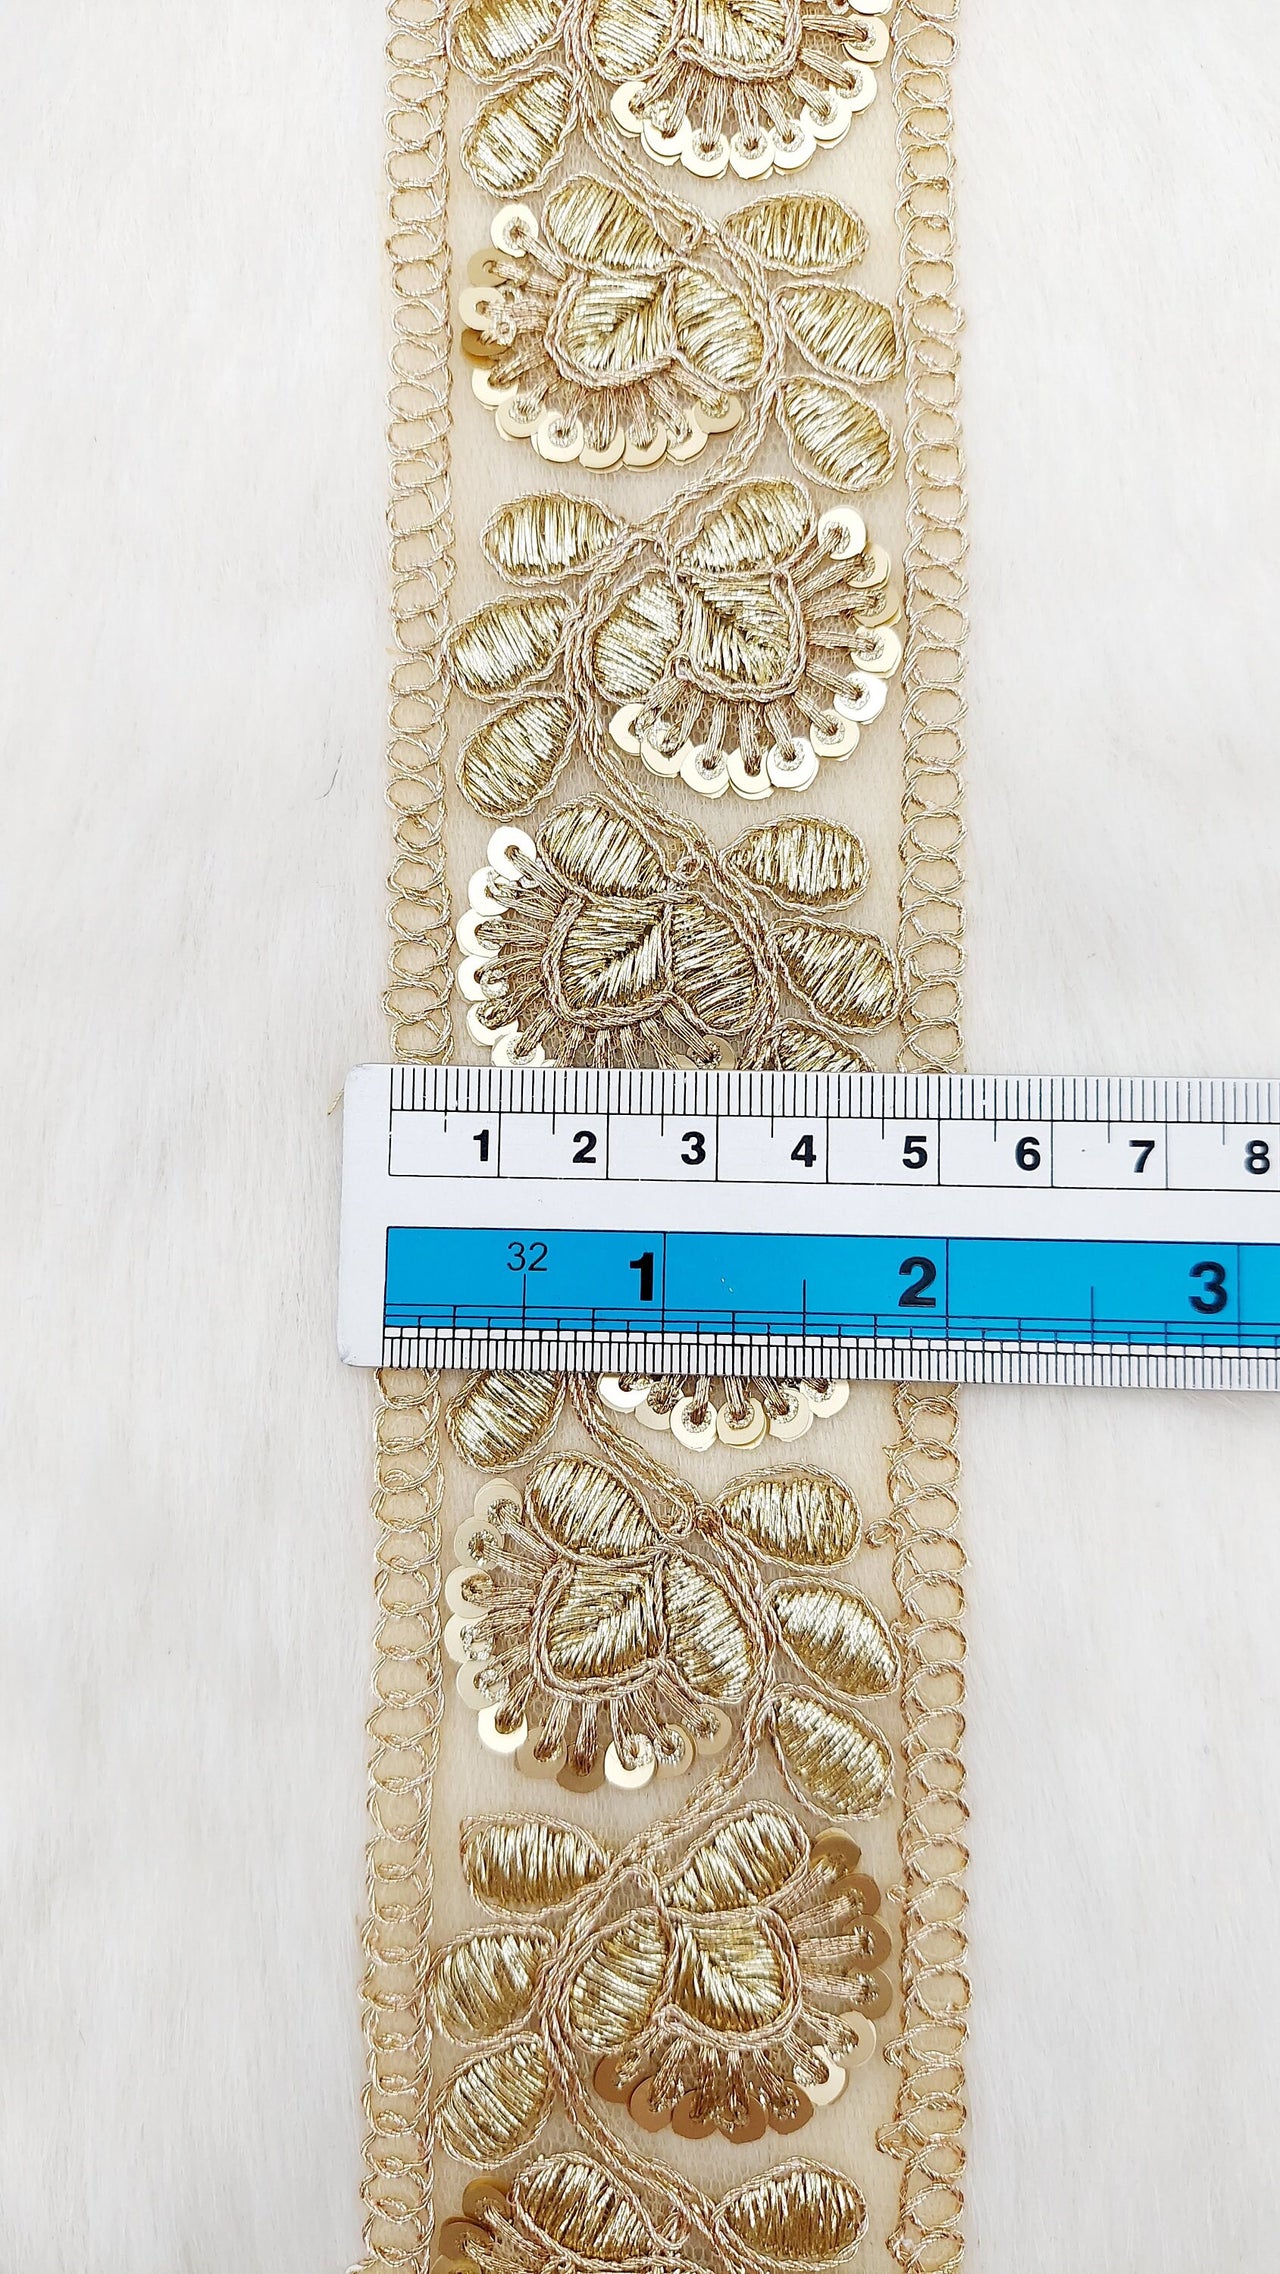 Gold Sequins Trim 2 Yards Decorative Floral Embroidered Lace Sari Border Costume Ribbon Crafting